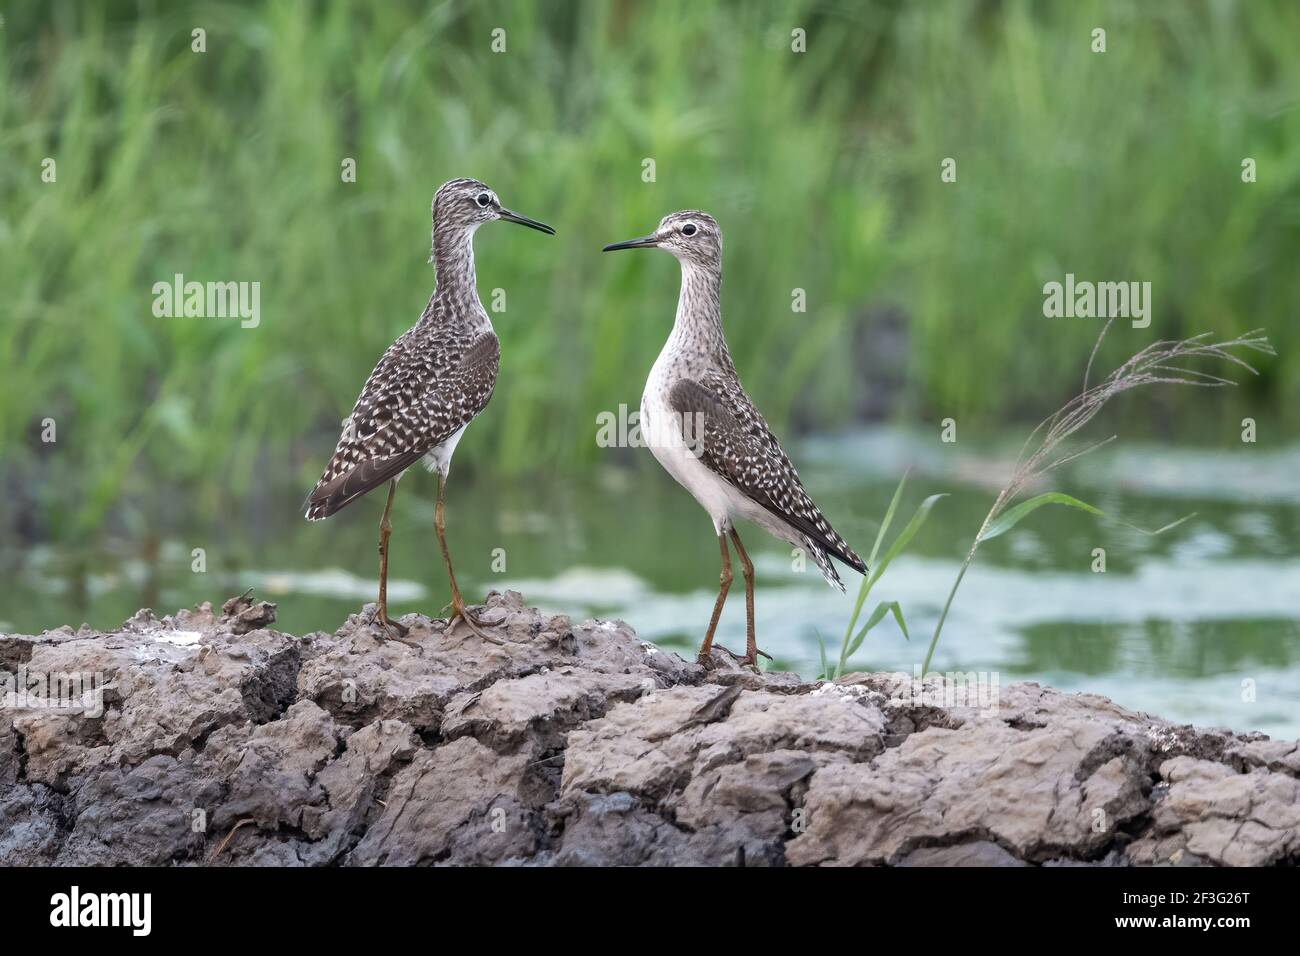 The wood sandpiper (Tringa glareola) is a small wader. This Eurasian species is the smallest of the shanks, which are mid-sized long-legged waders. Stock Photo